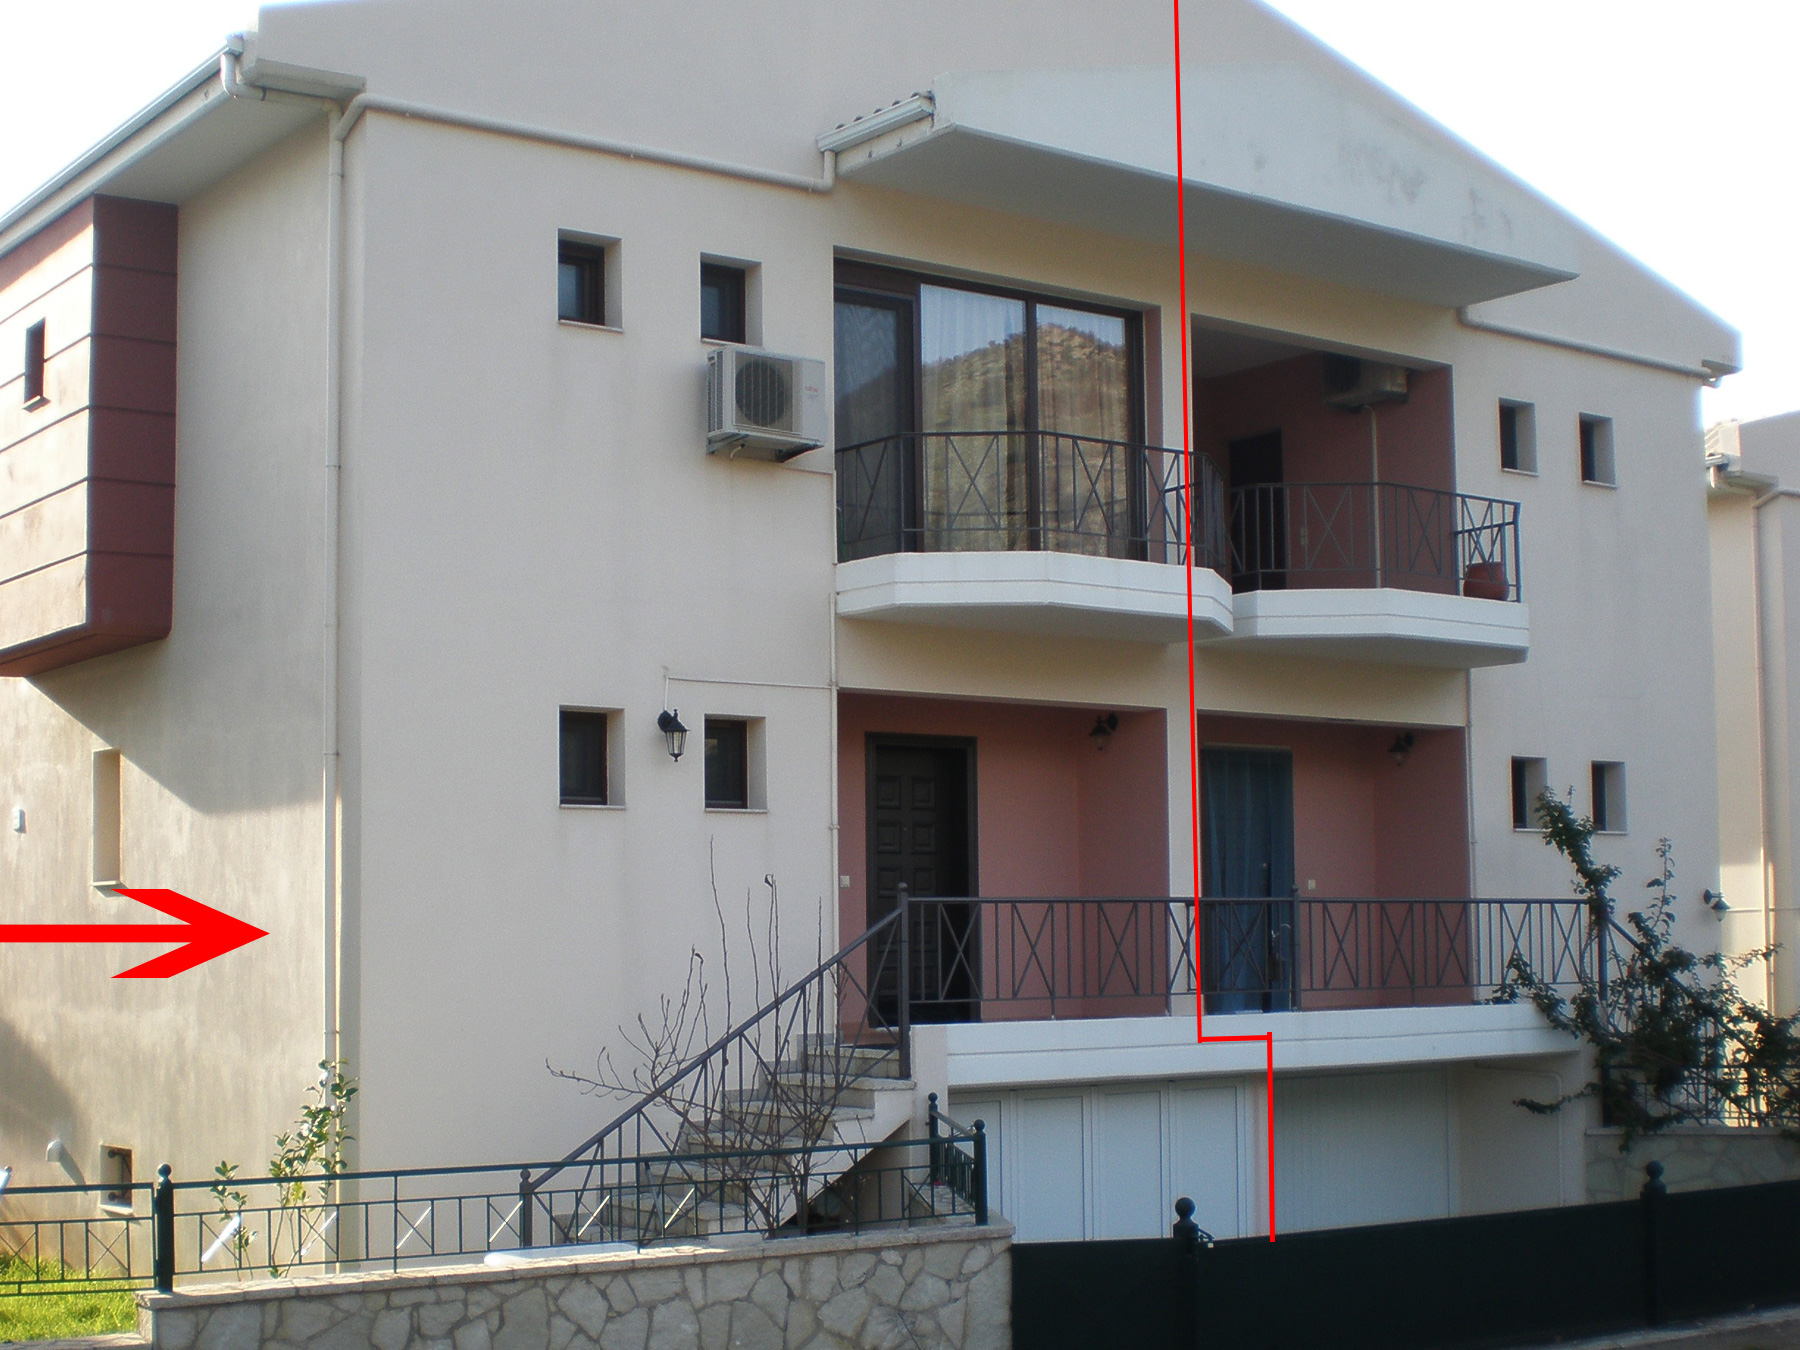 For sale a maisonette of 2009 with a total of 135 sq.m. in Sivota, Thesprotia